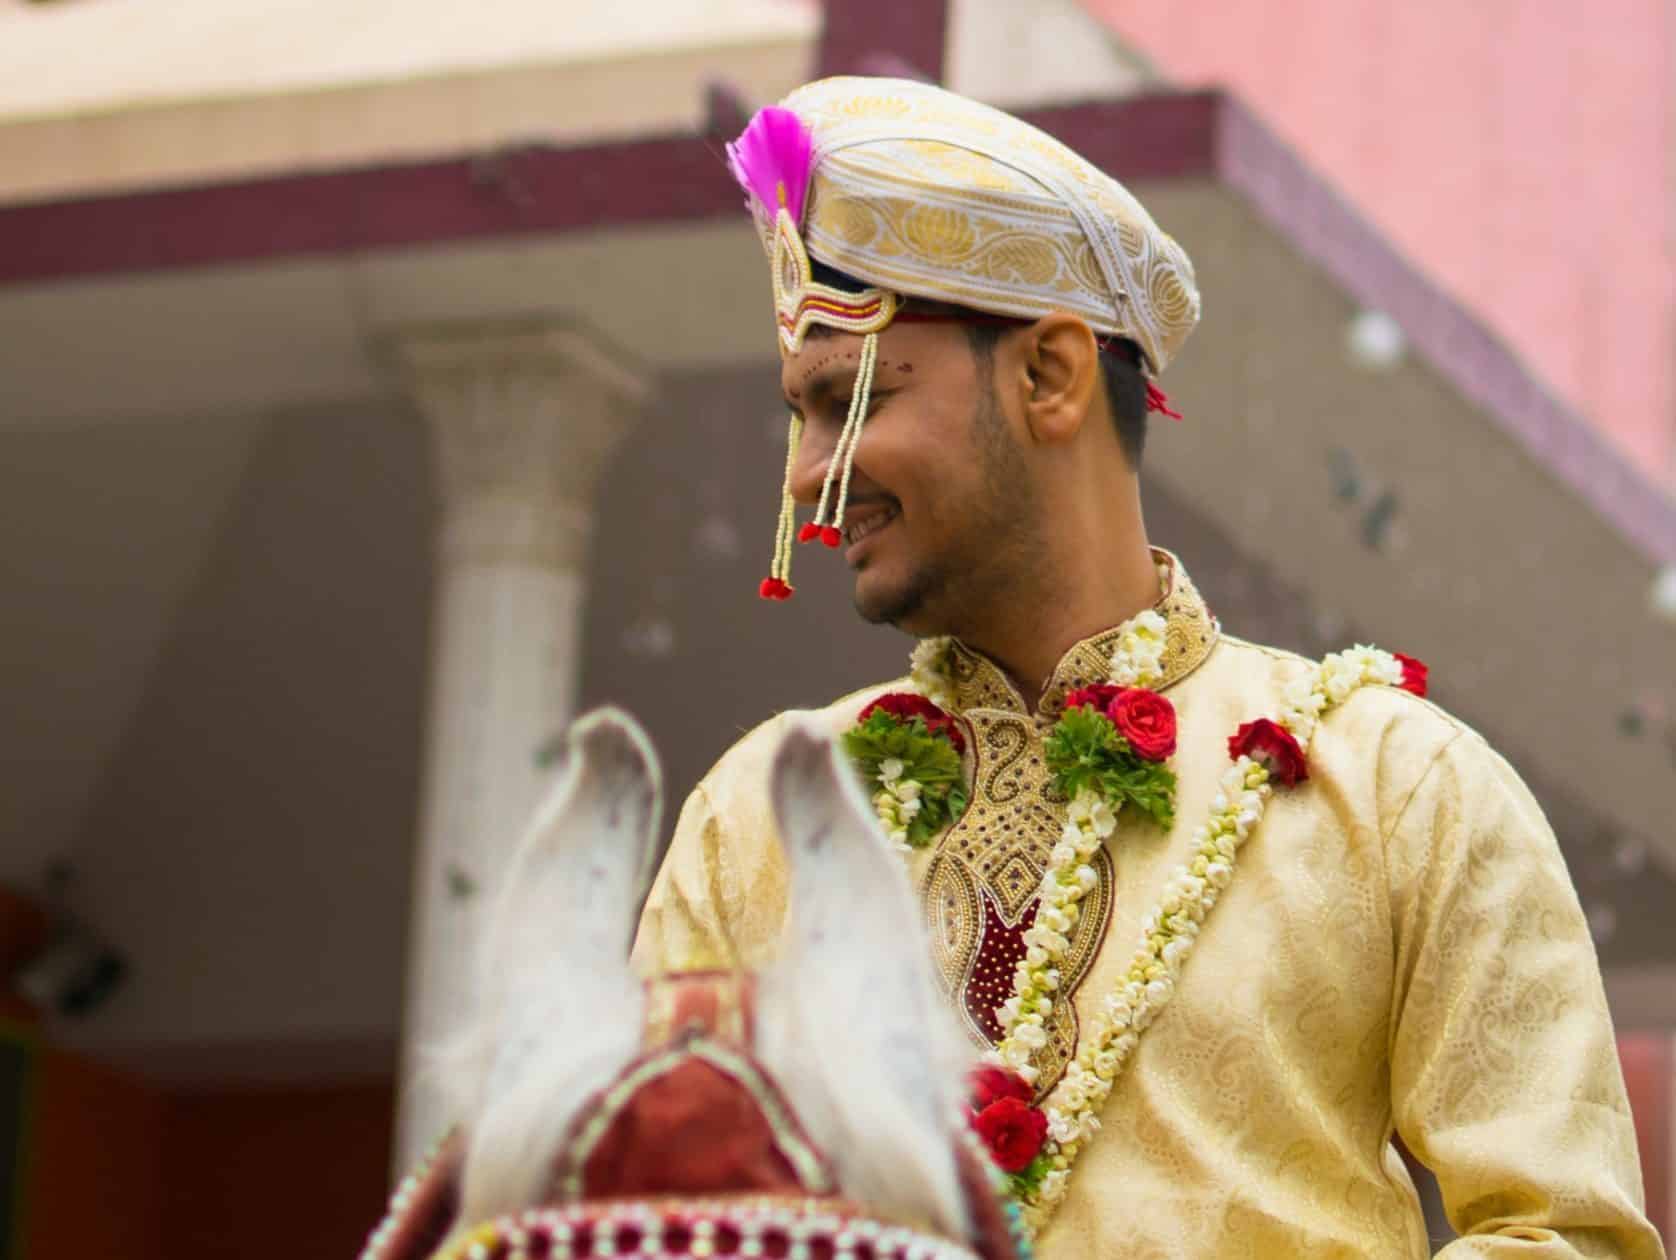 Indian groom riding a horse to his destination wedding